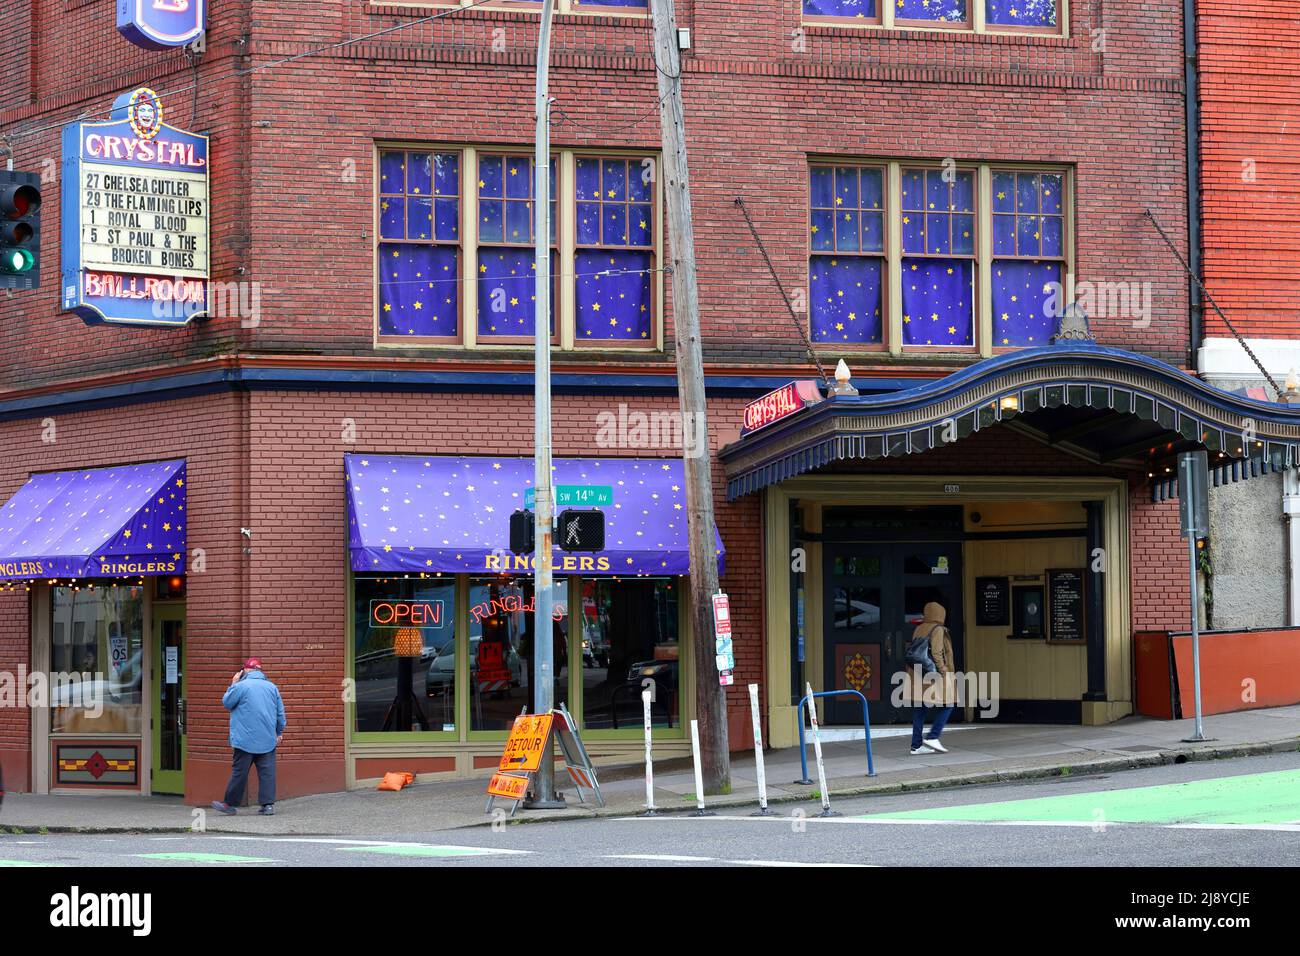 Crystal Ballroom, Ringlers Pub, 1332 W Burnside St, Portland, Oregon. exterior storefront of a live music venue, and bar in Downtown Portland. Stock Photo